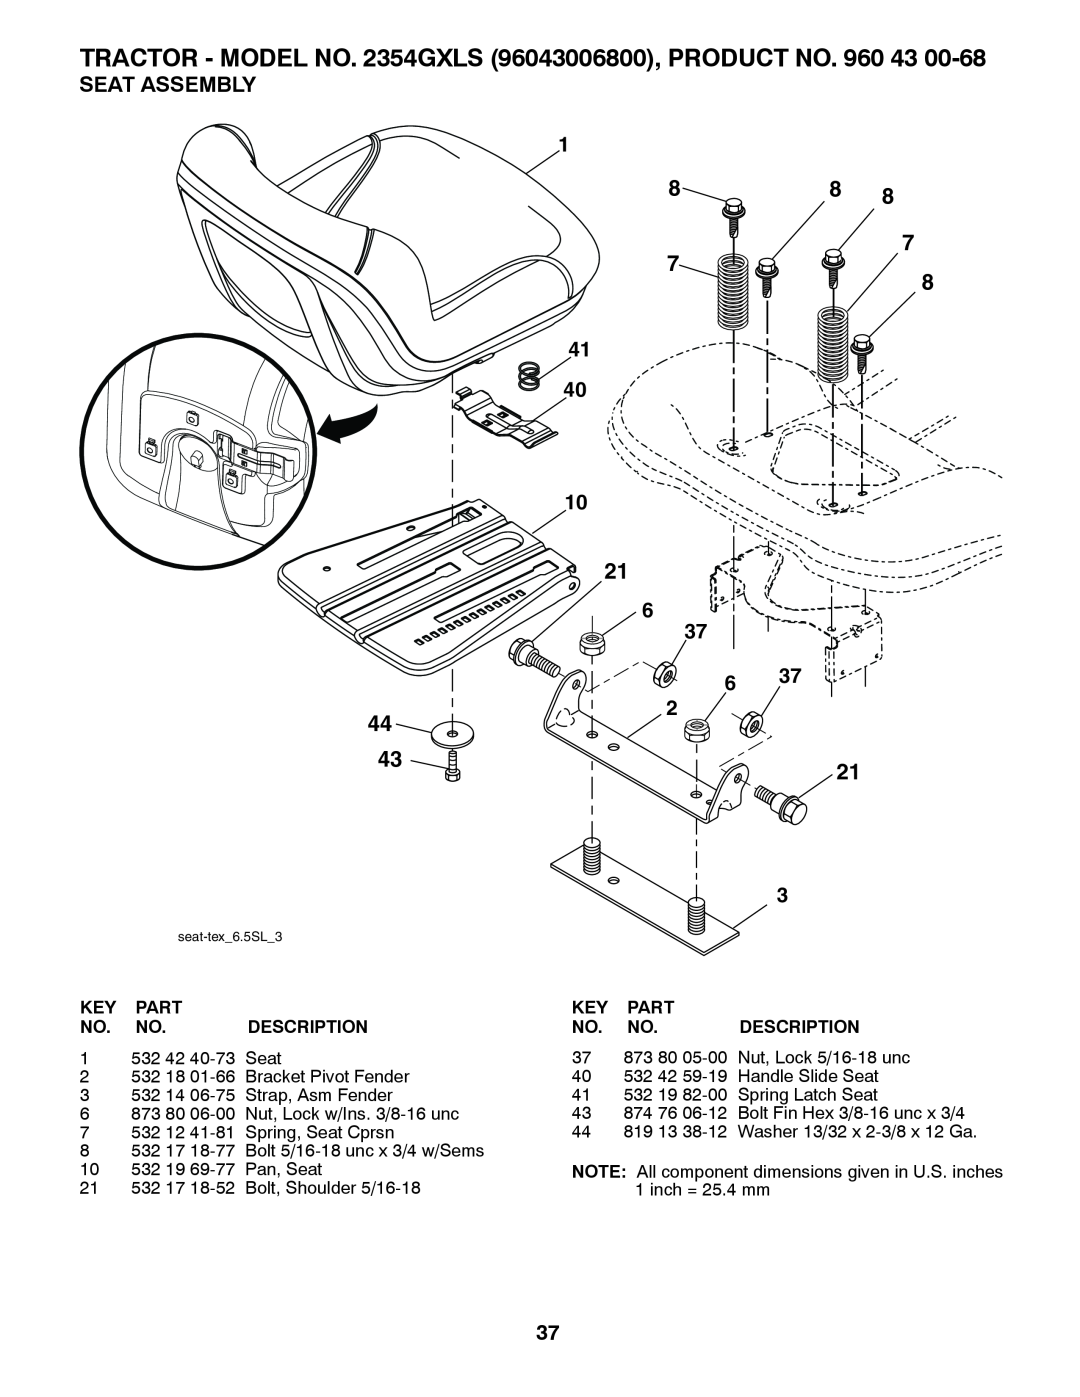 Husqvarna 2354GXLS, 96043006800 owner manual Seat Assembly 